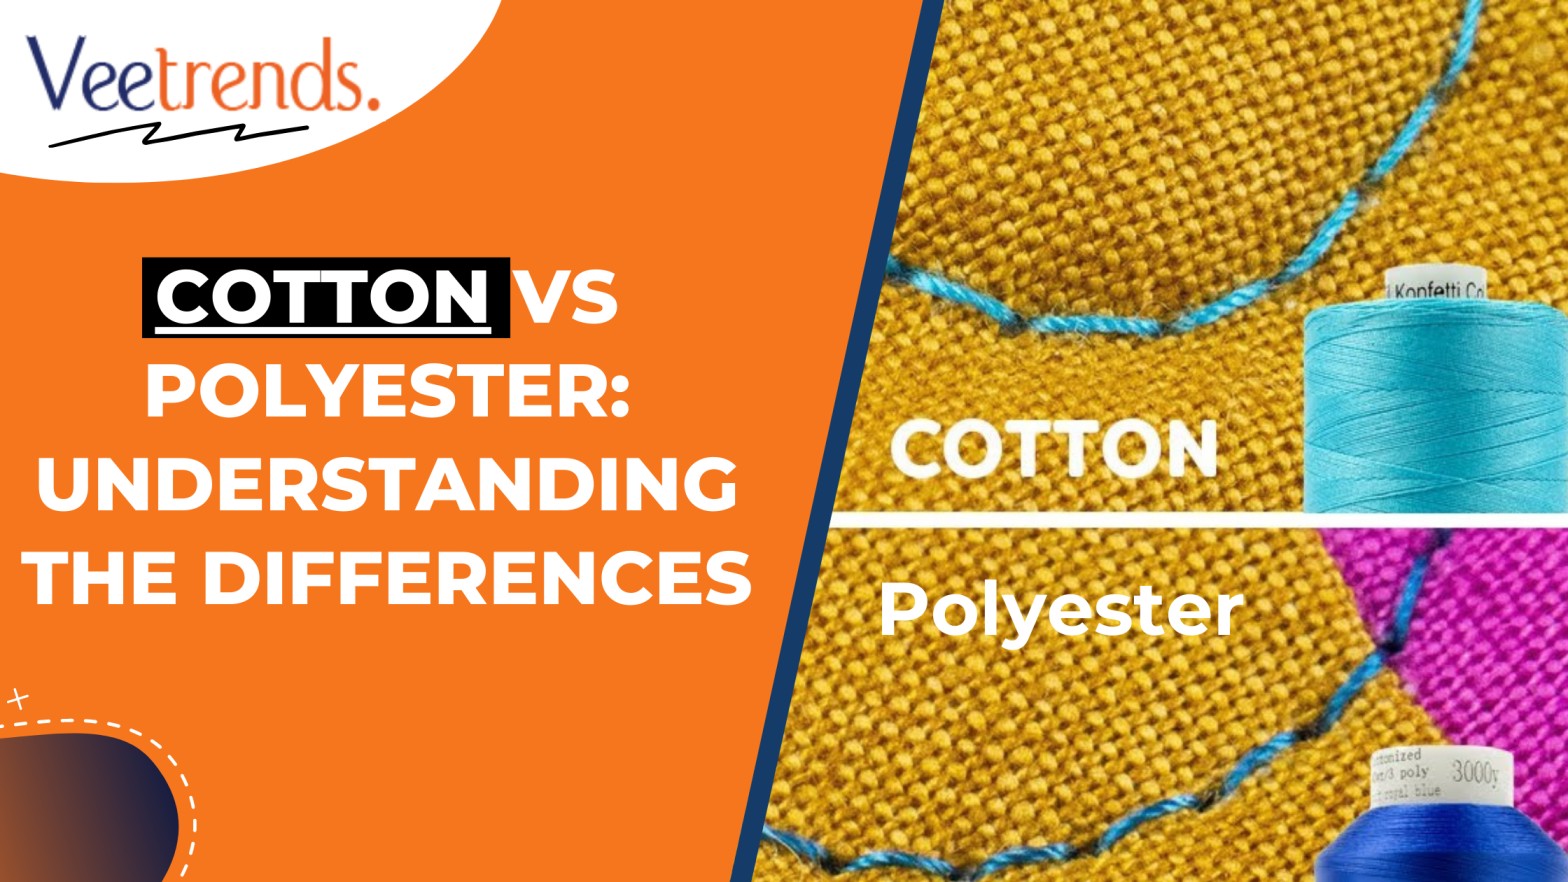 Cotton VS Polyester: Understanding the Differences